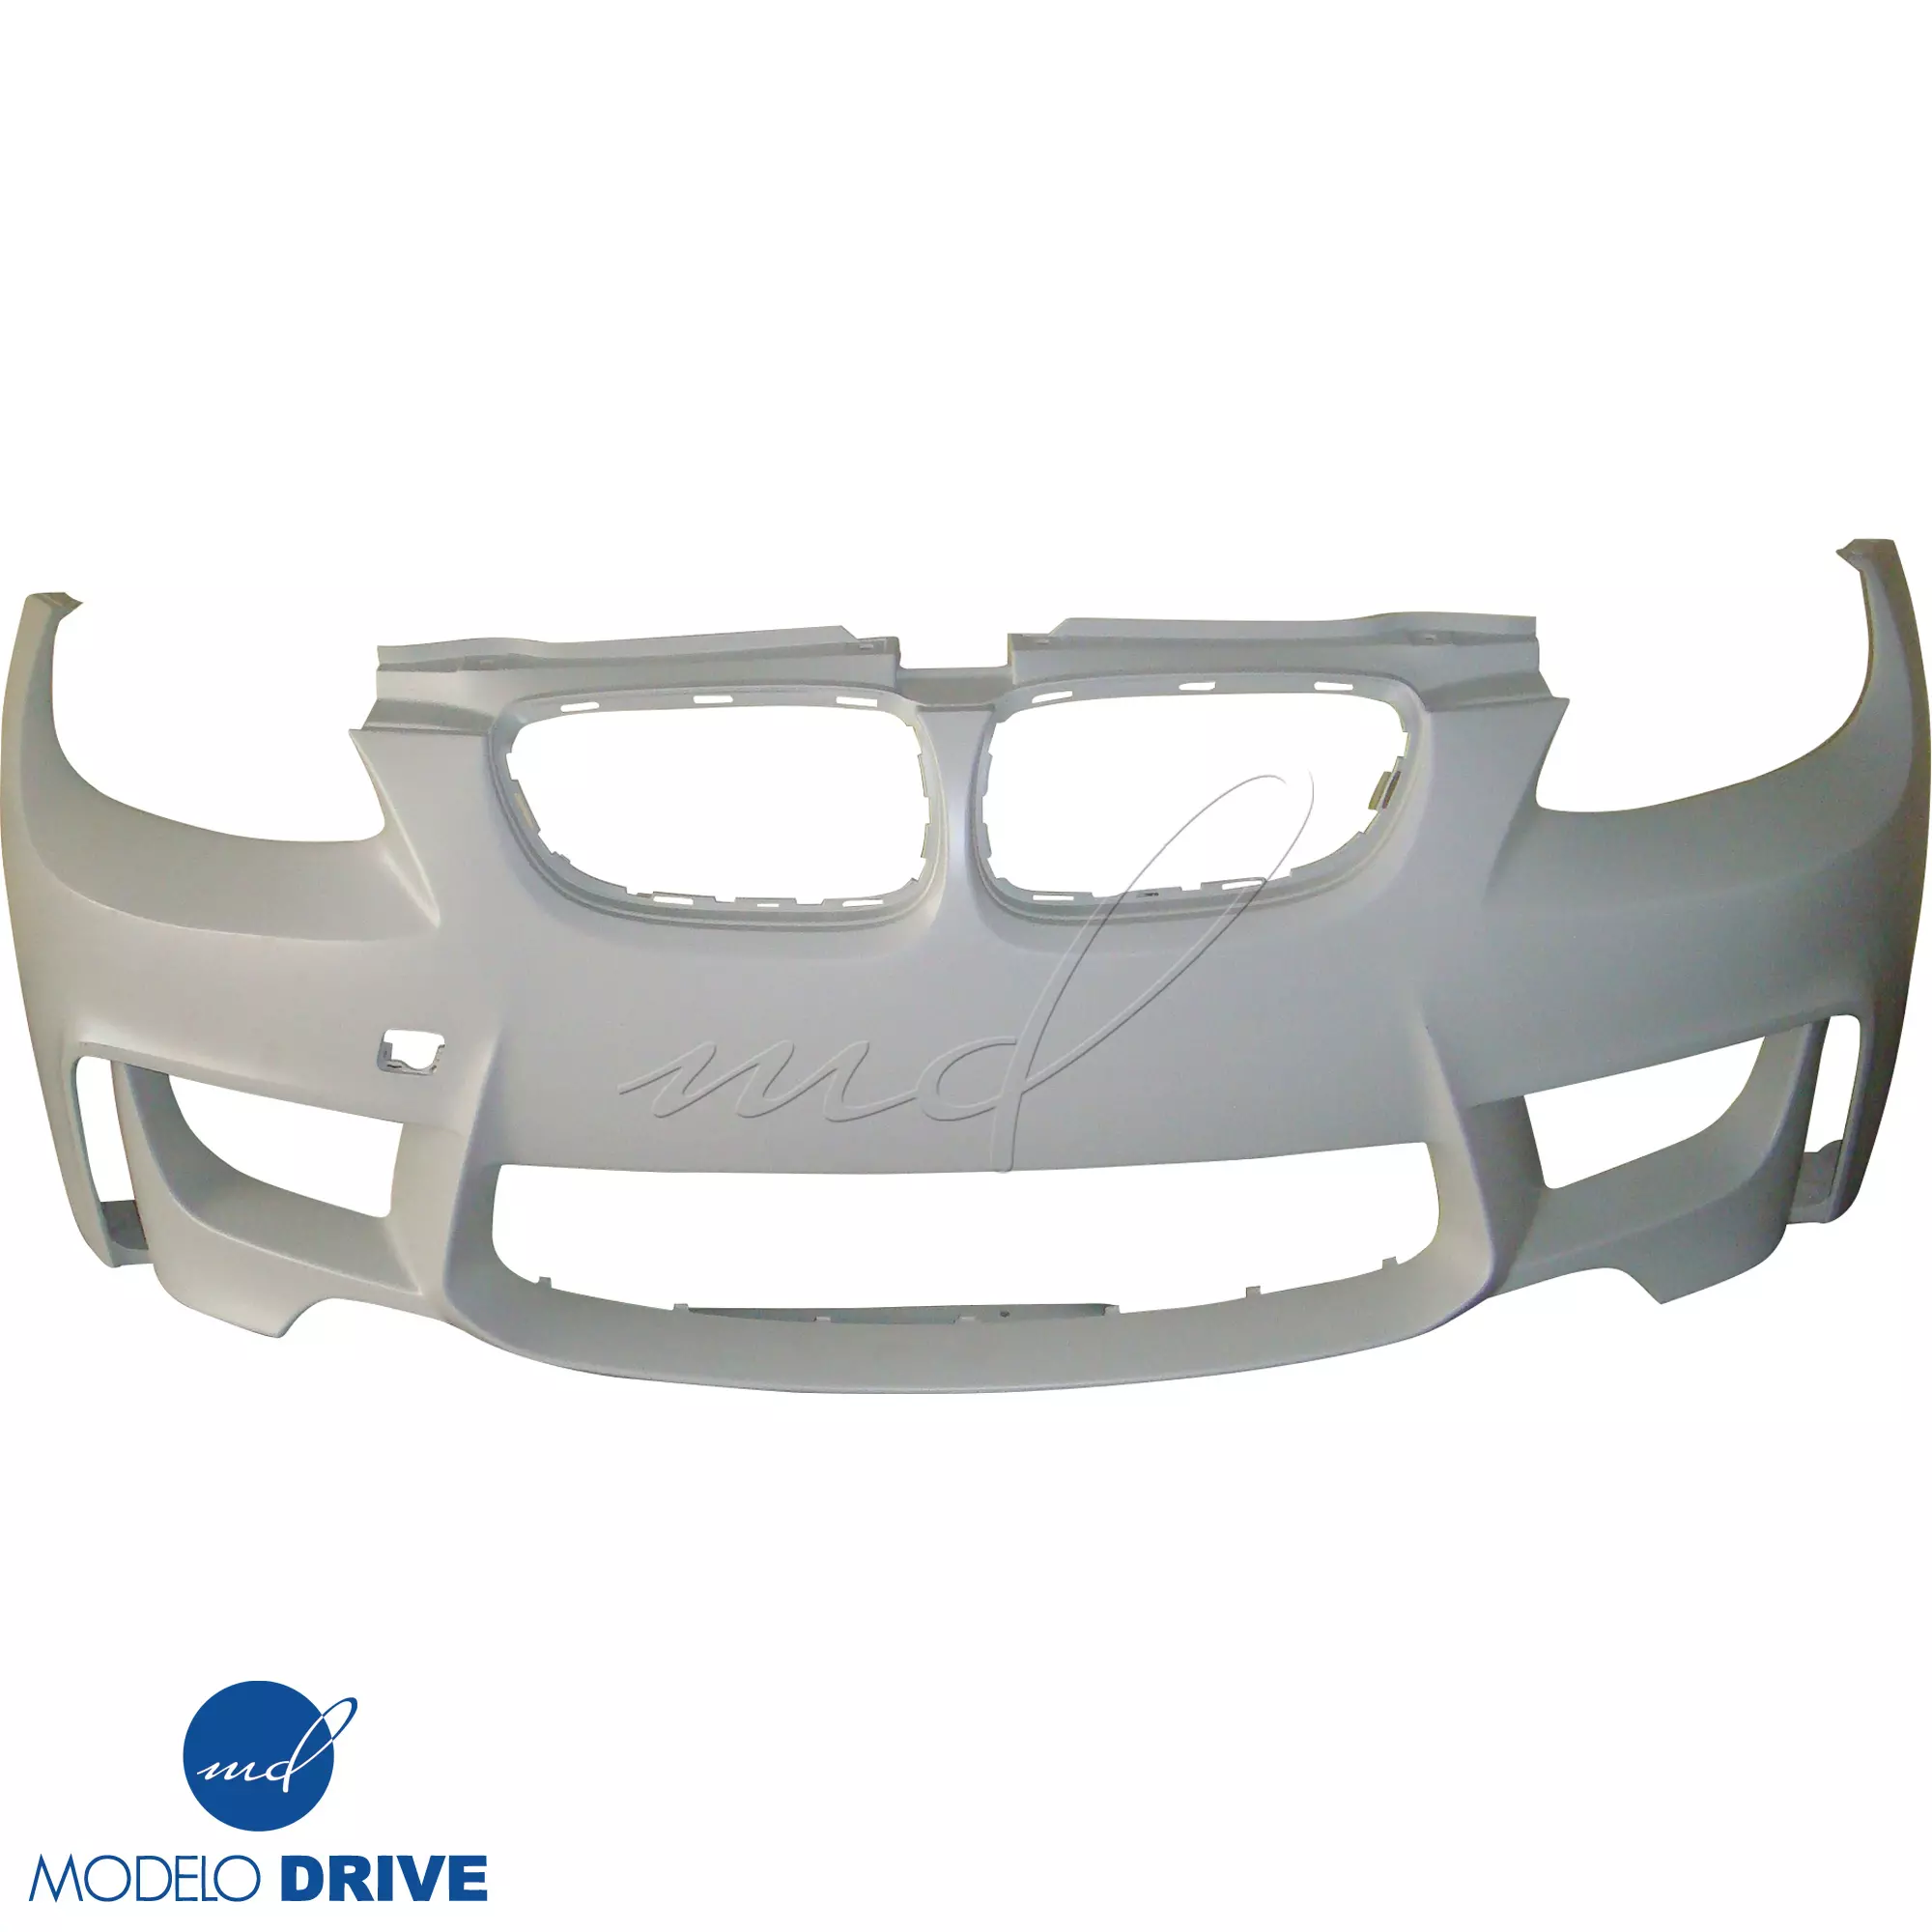 ModeloDrive FRP 1M-Style Front Bumper > BMW 3-Series E92 2007-2010 > 2dr - Image 15